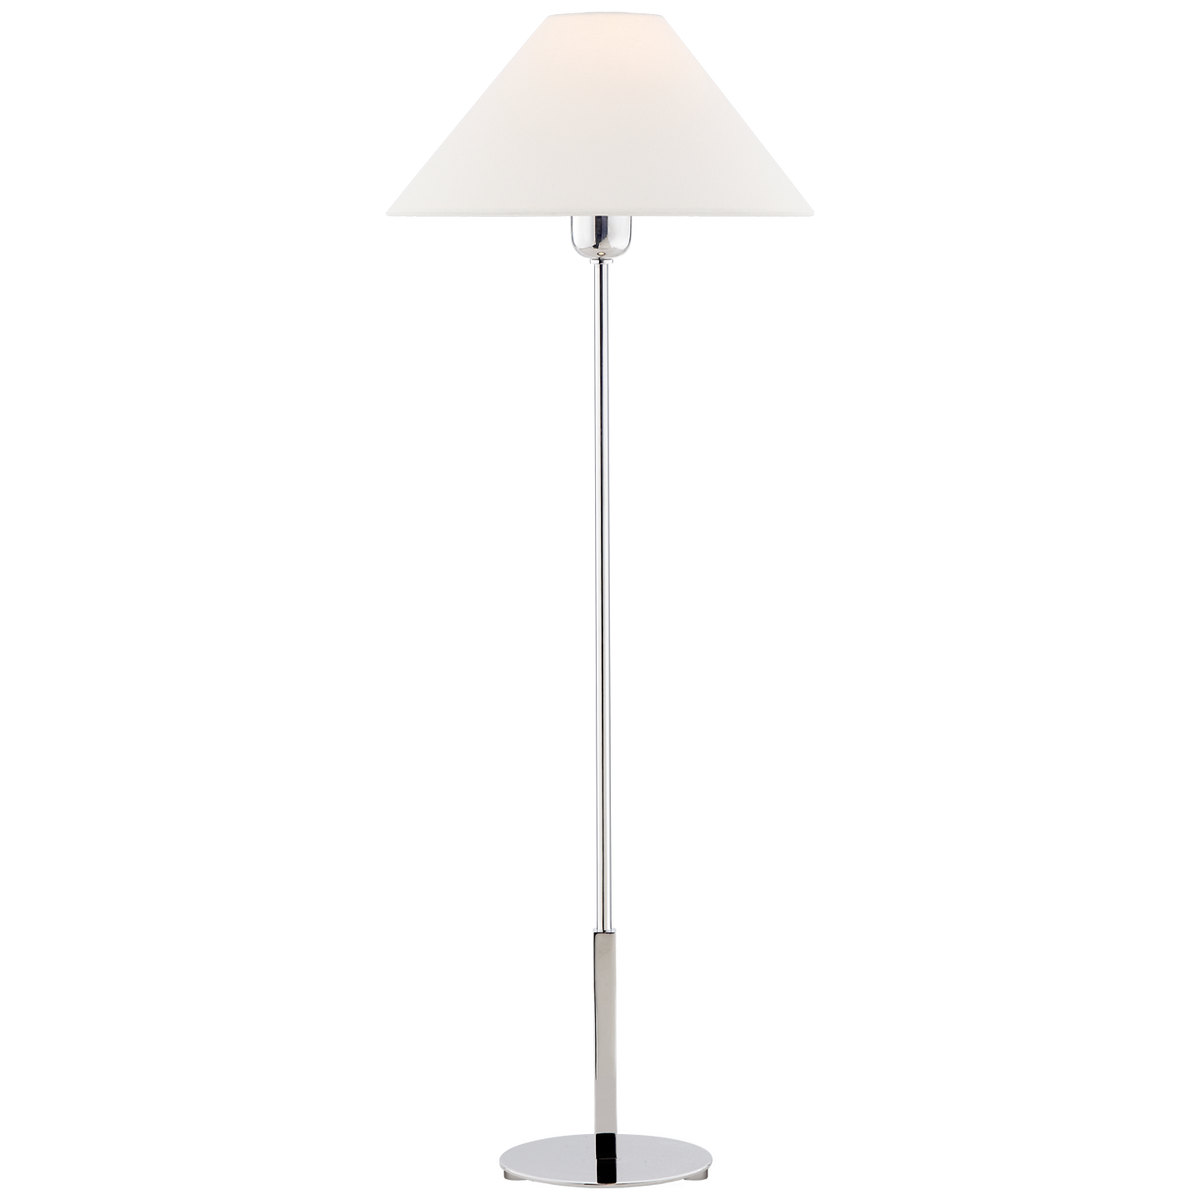 Hackney Buffet Lamp - Polished Nickel with Linen Shade